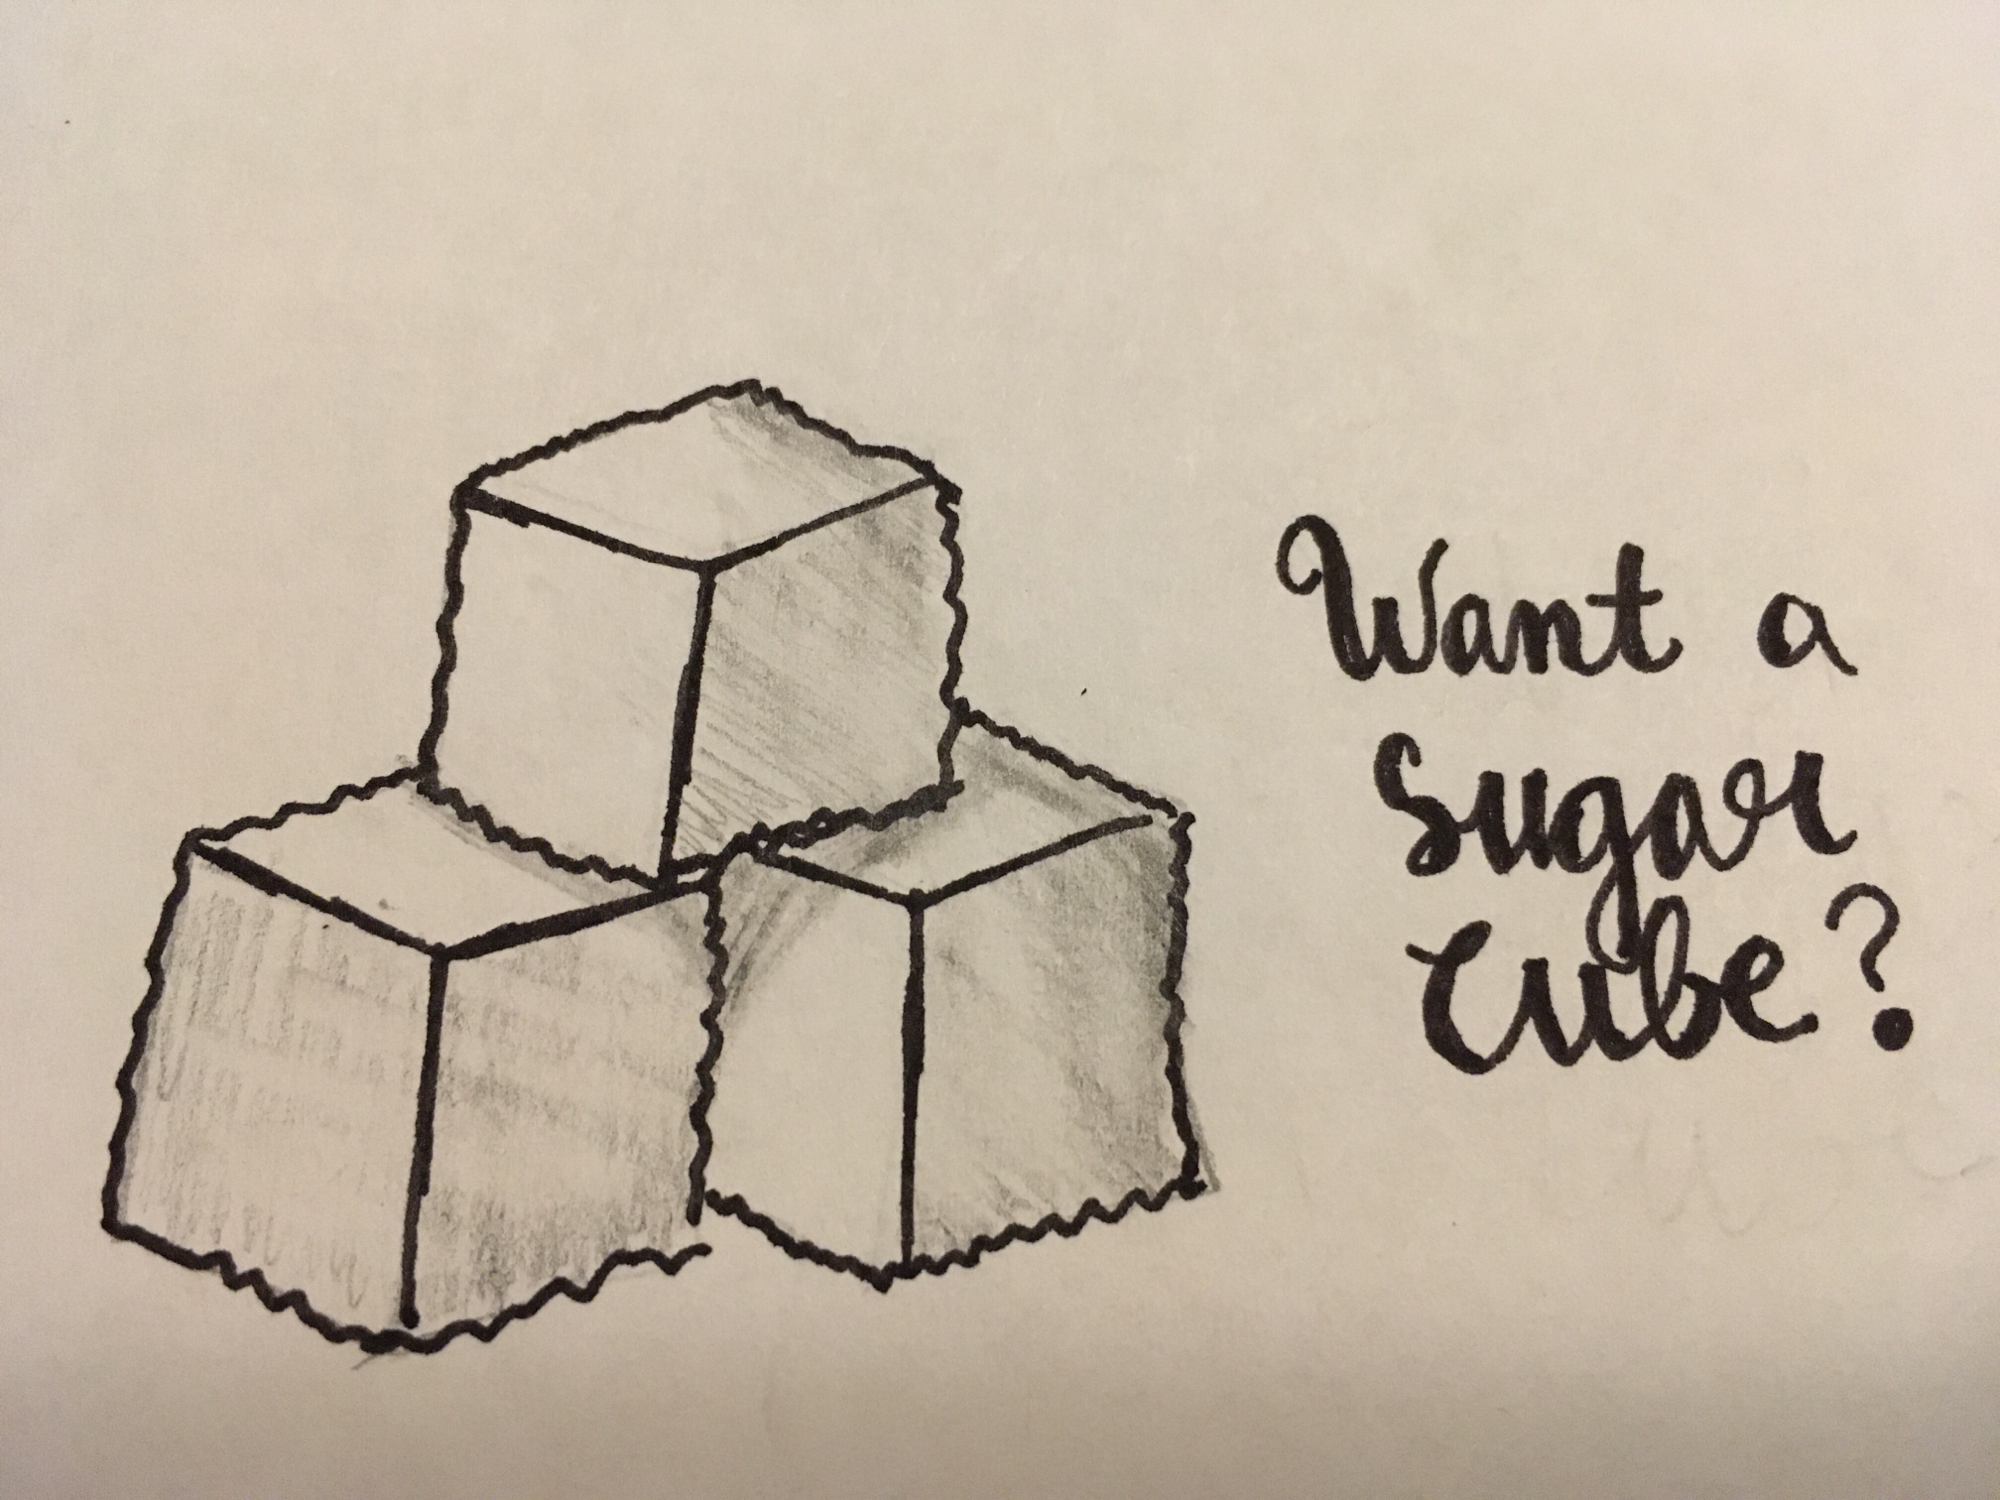 finnick and katniss want a sugar cube